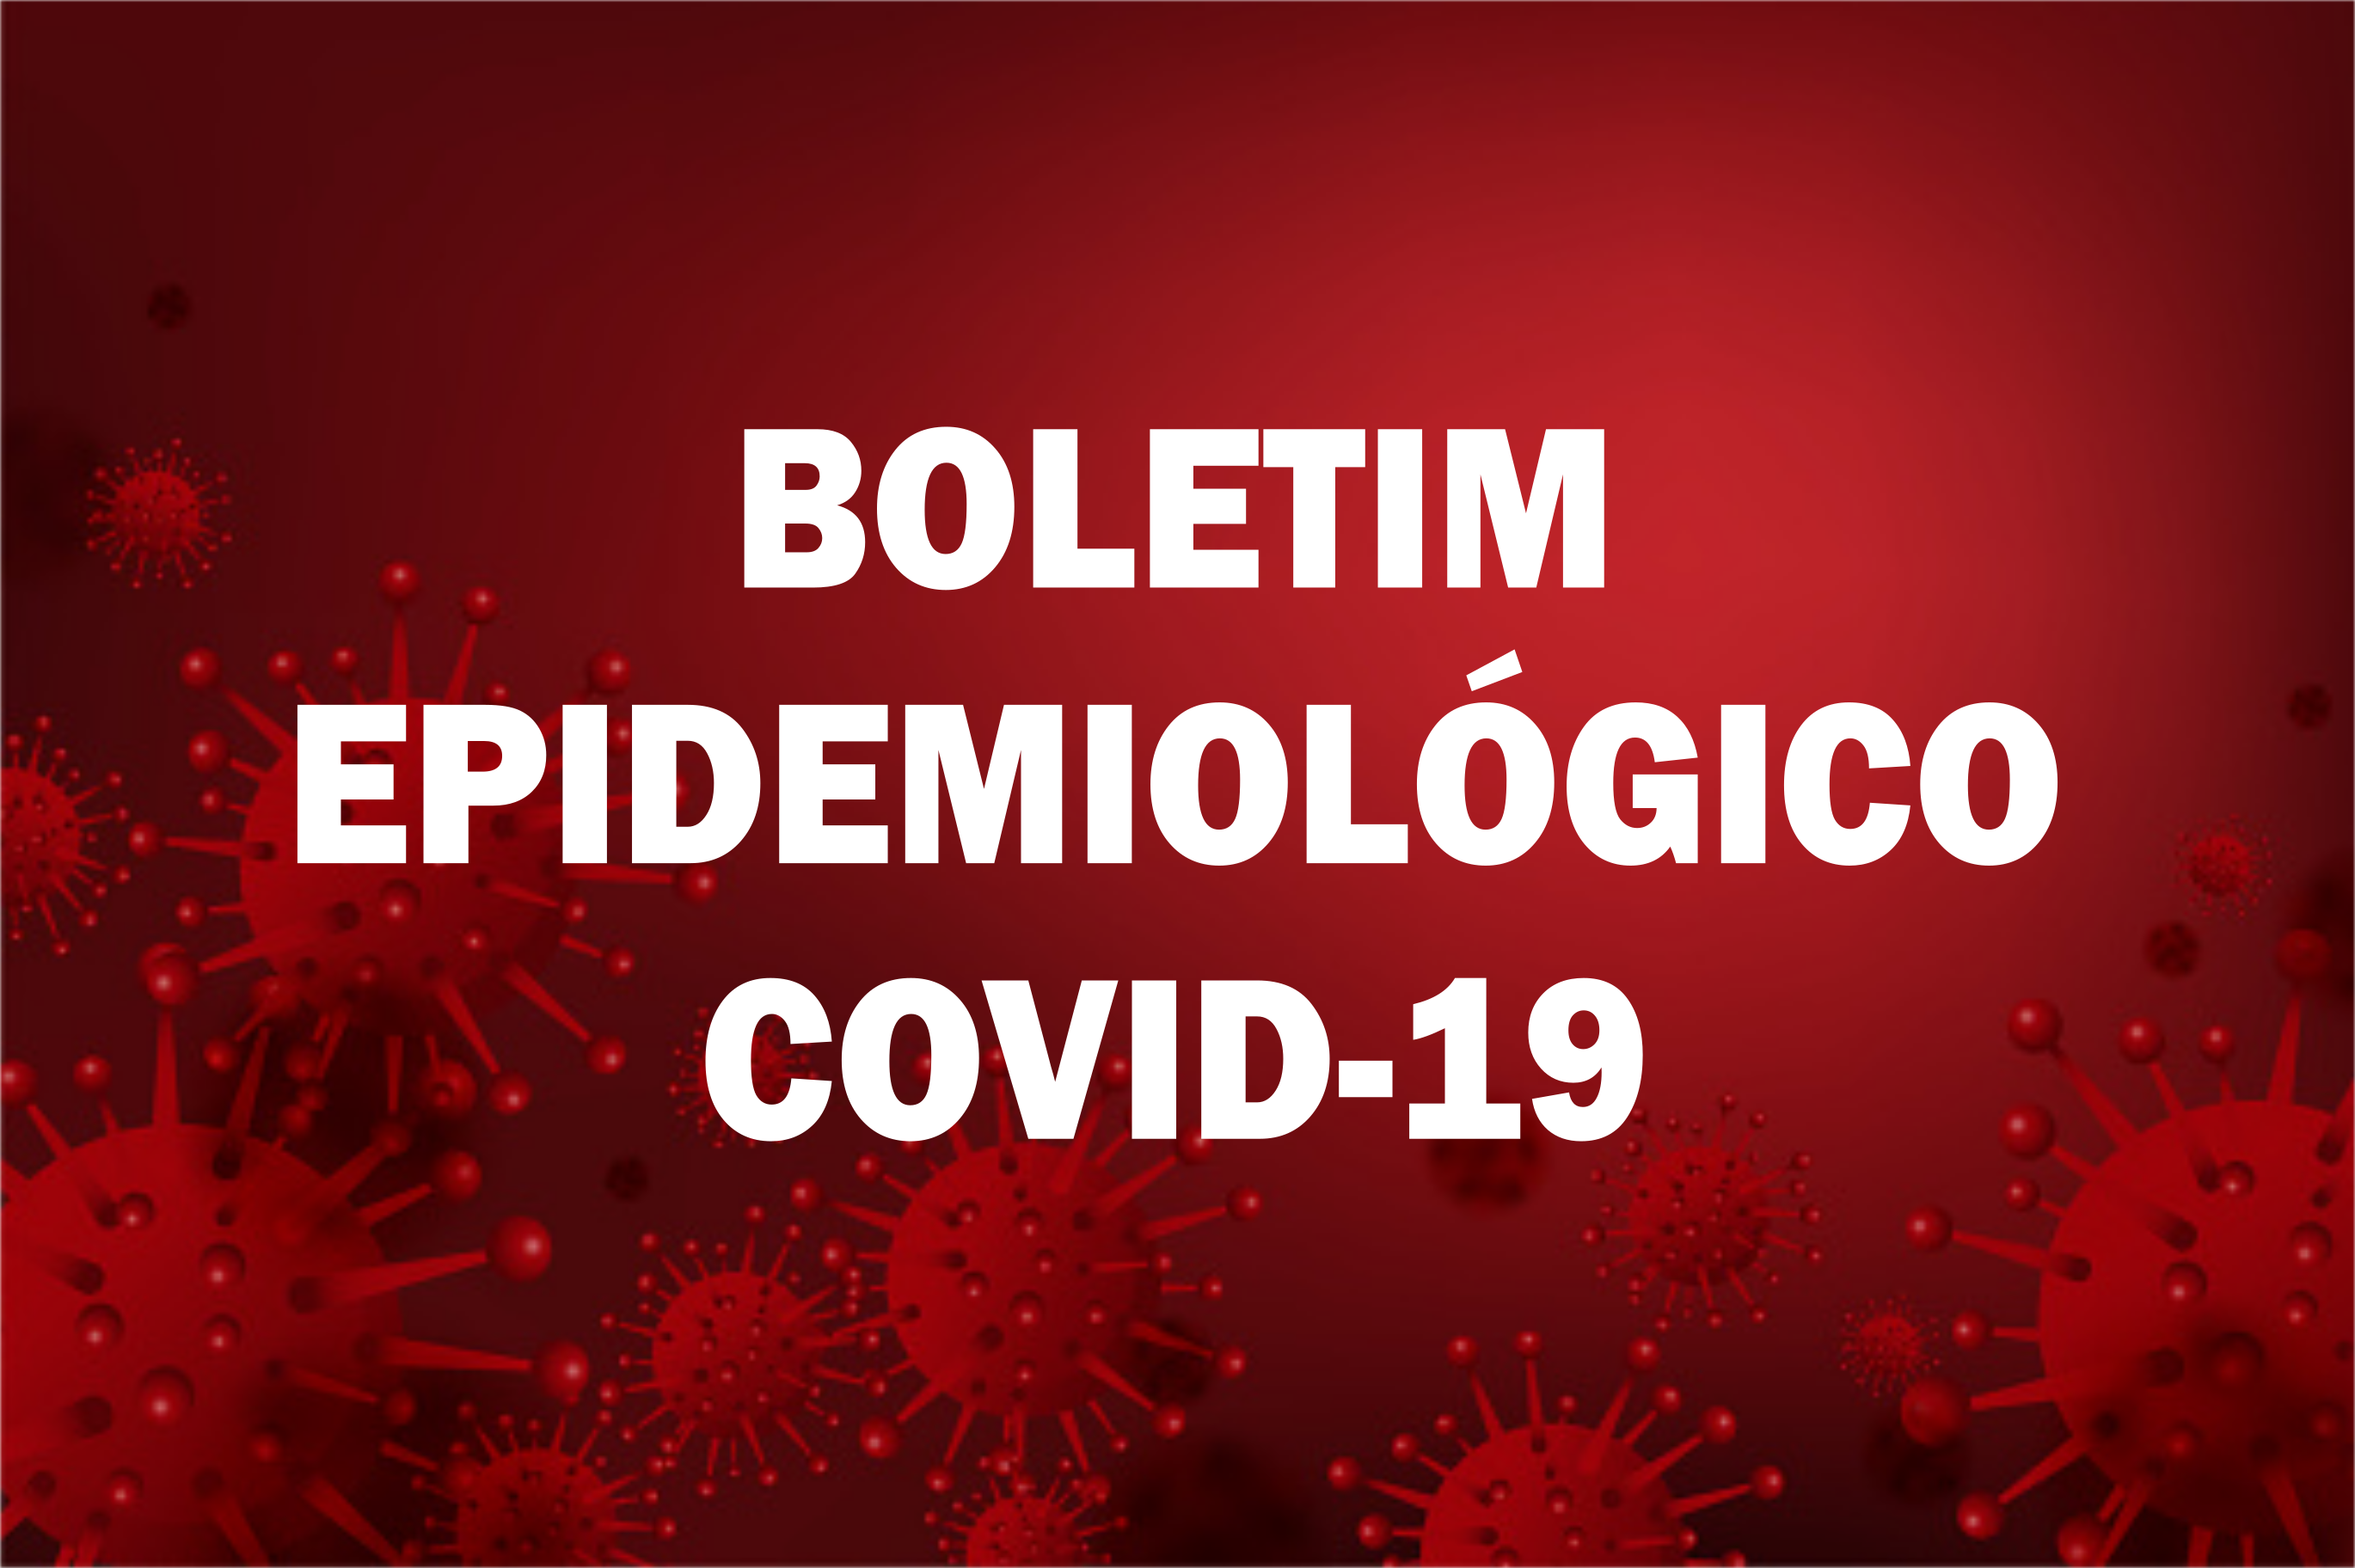 You are currently viewing BOLETIM EPIDEMIOLÓGICO Nº 154 (COVID-19)